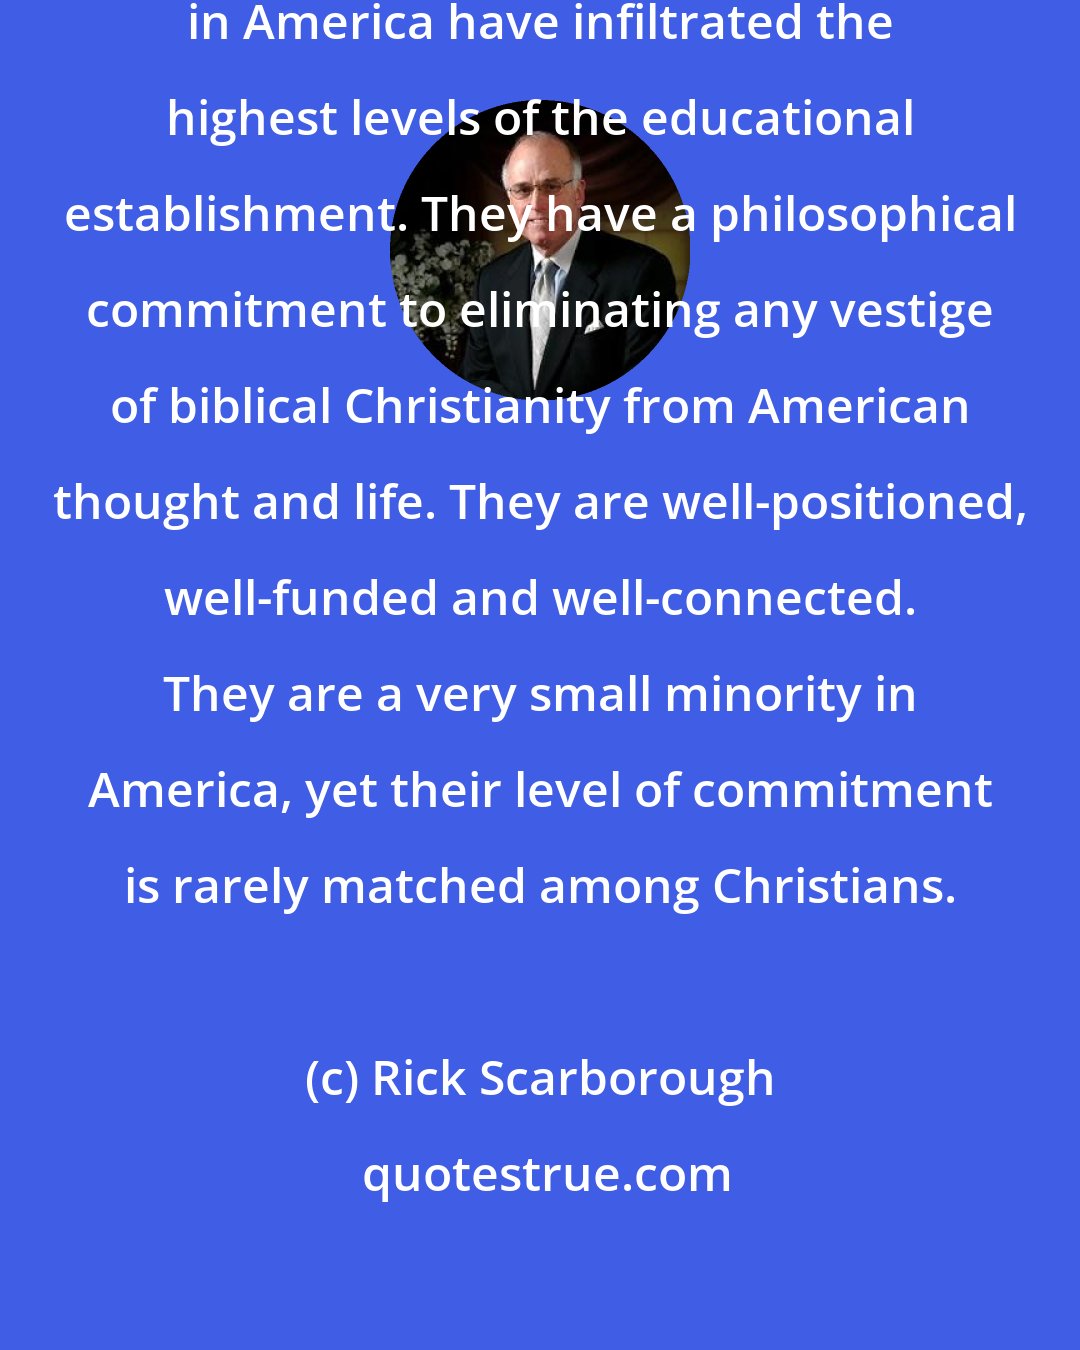 Rick Scarborough: Those who are anti-God and anti-Christian in America have infiltrated the highest levels of the educational establishment. They have a philosophical commitment to eliminating any vestige of biblical Christianity from American thought and life. They are well-positioned, well-funded and well-connected. They are a very small minority in America, yet their level of commitment is rarely matched among Christians.